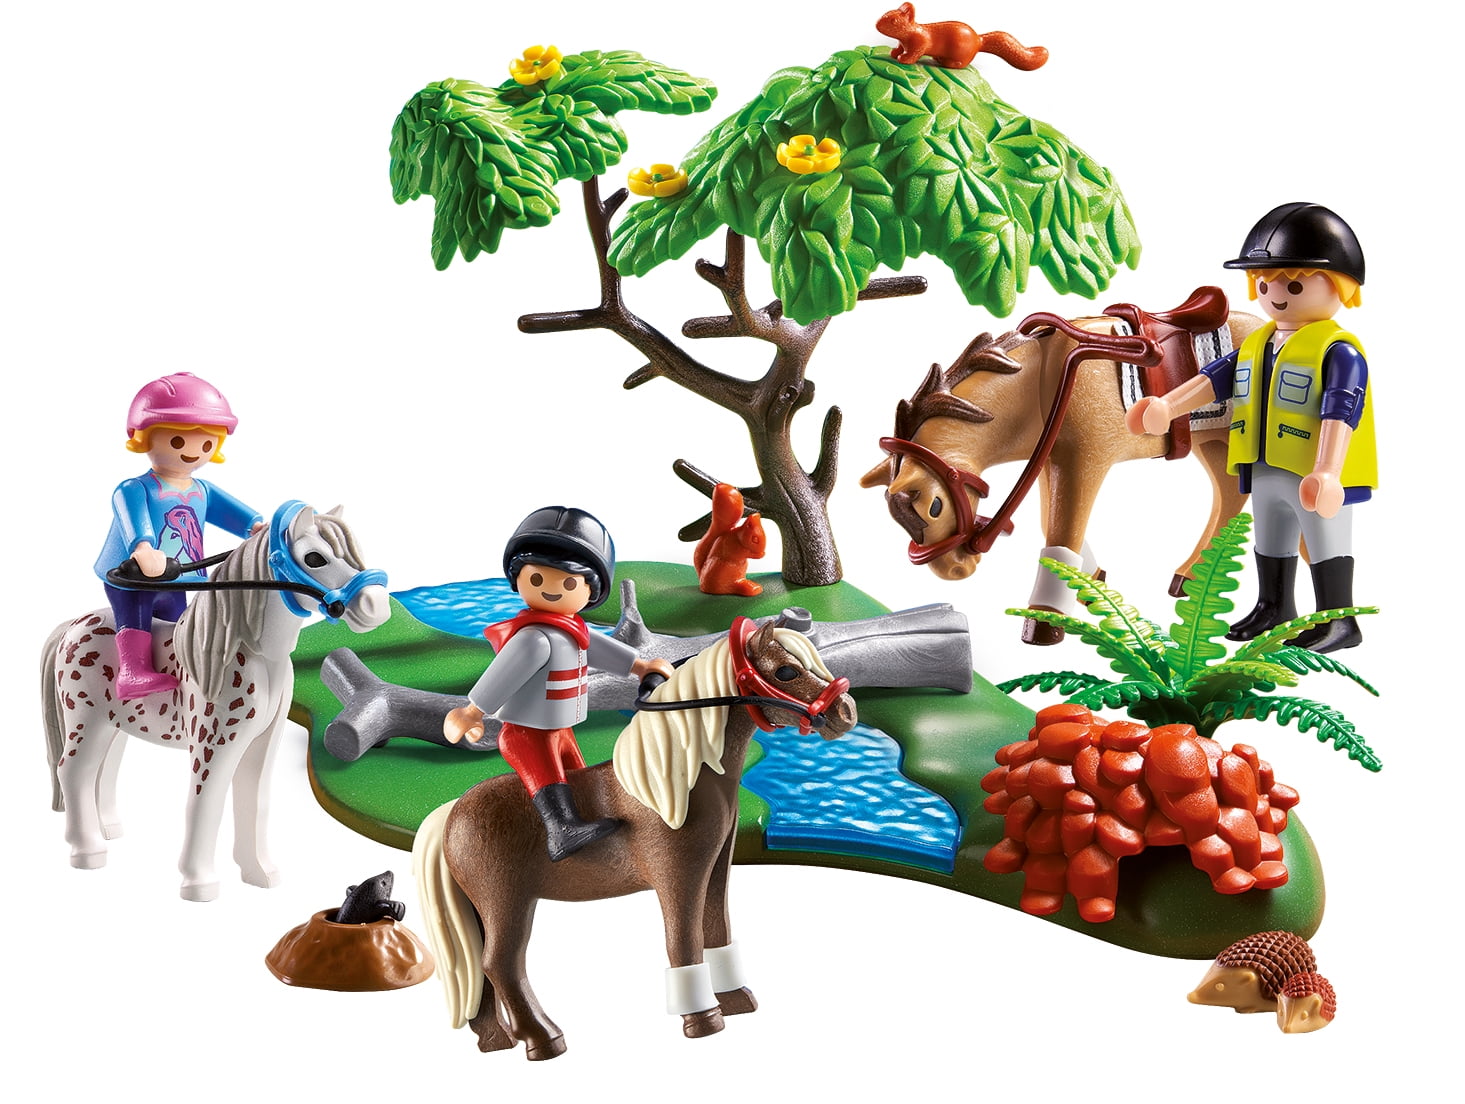 Playmobil @ @ Barriere pens @ @ @ @ @ cloture animals ranch saloon 81 